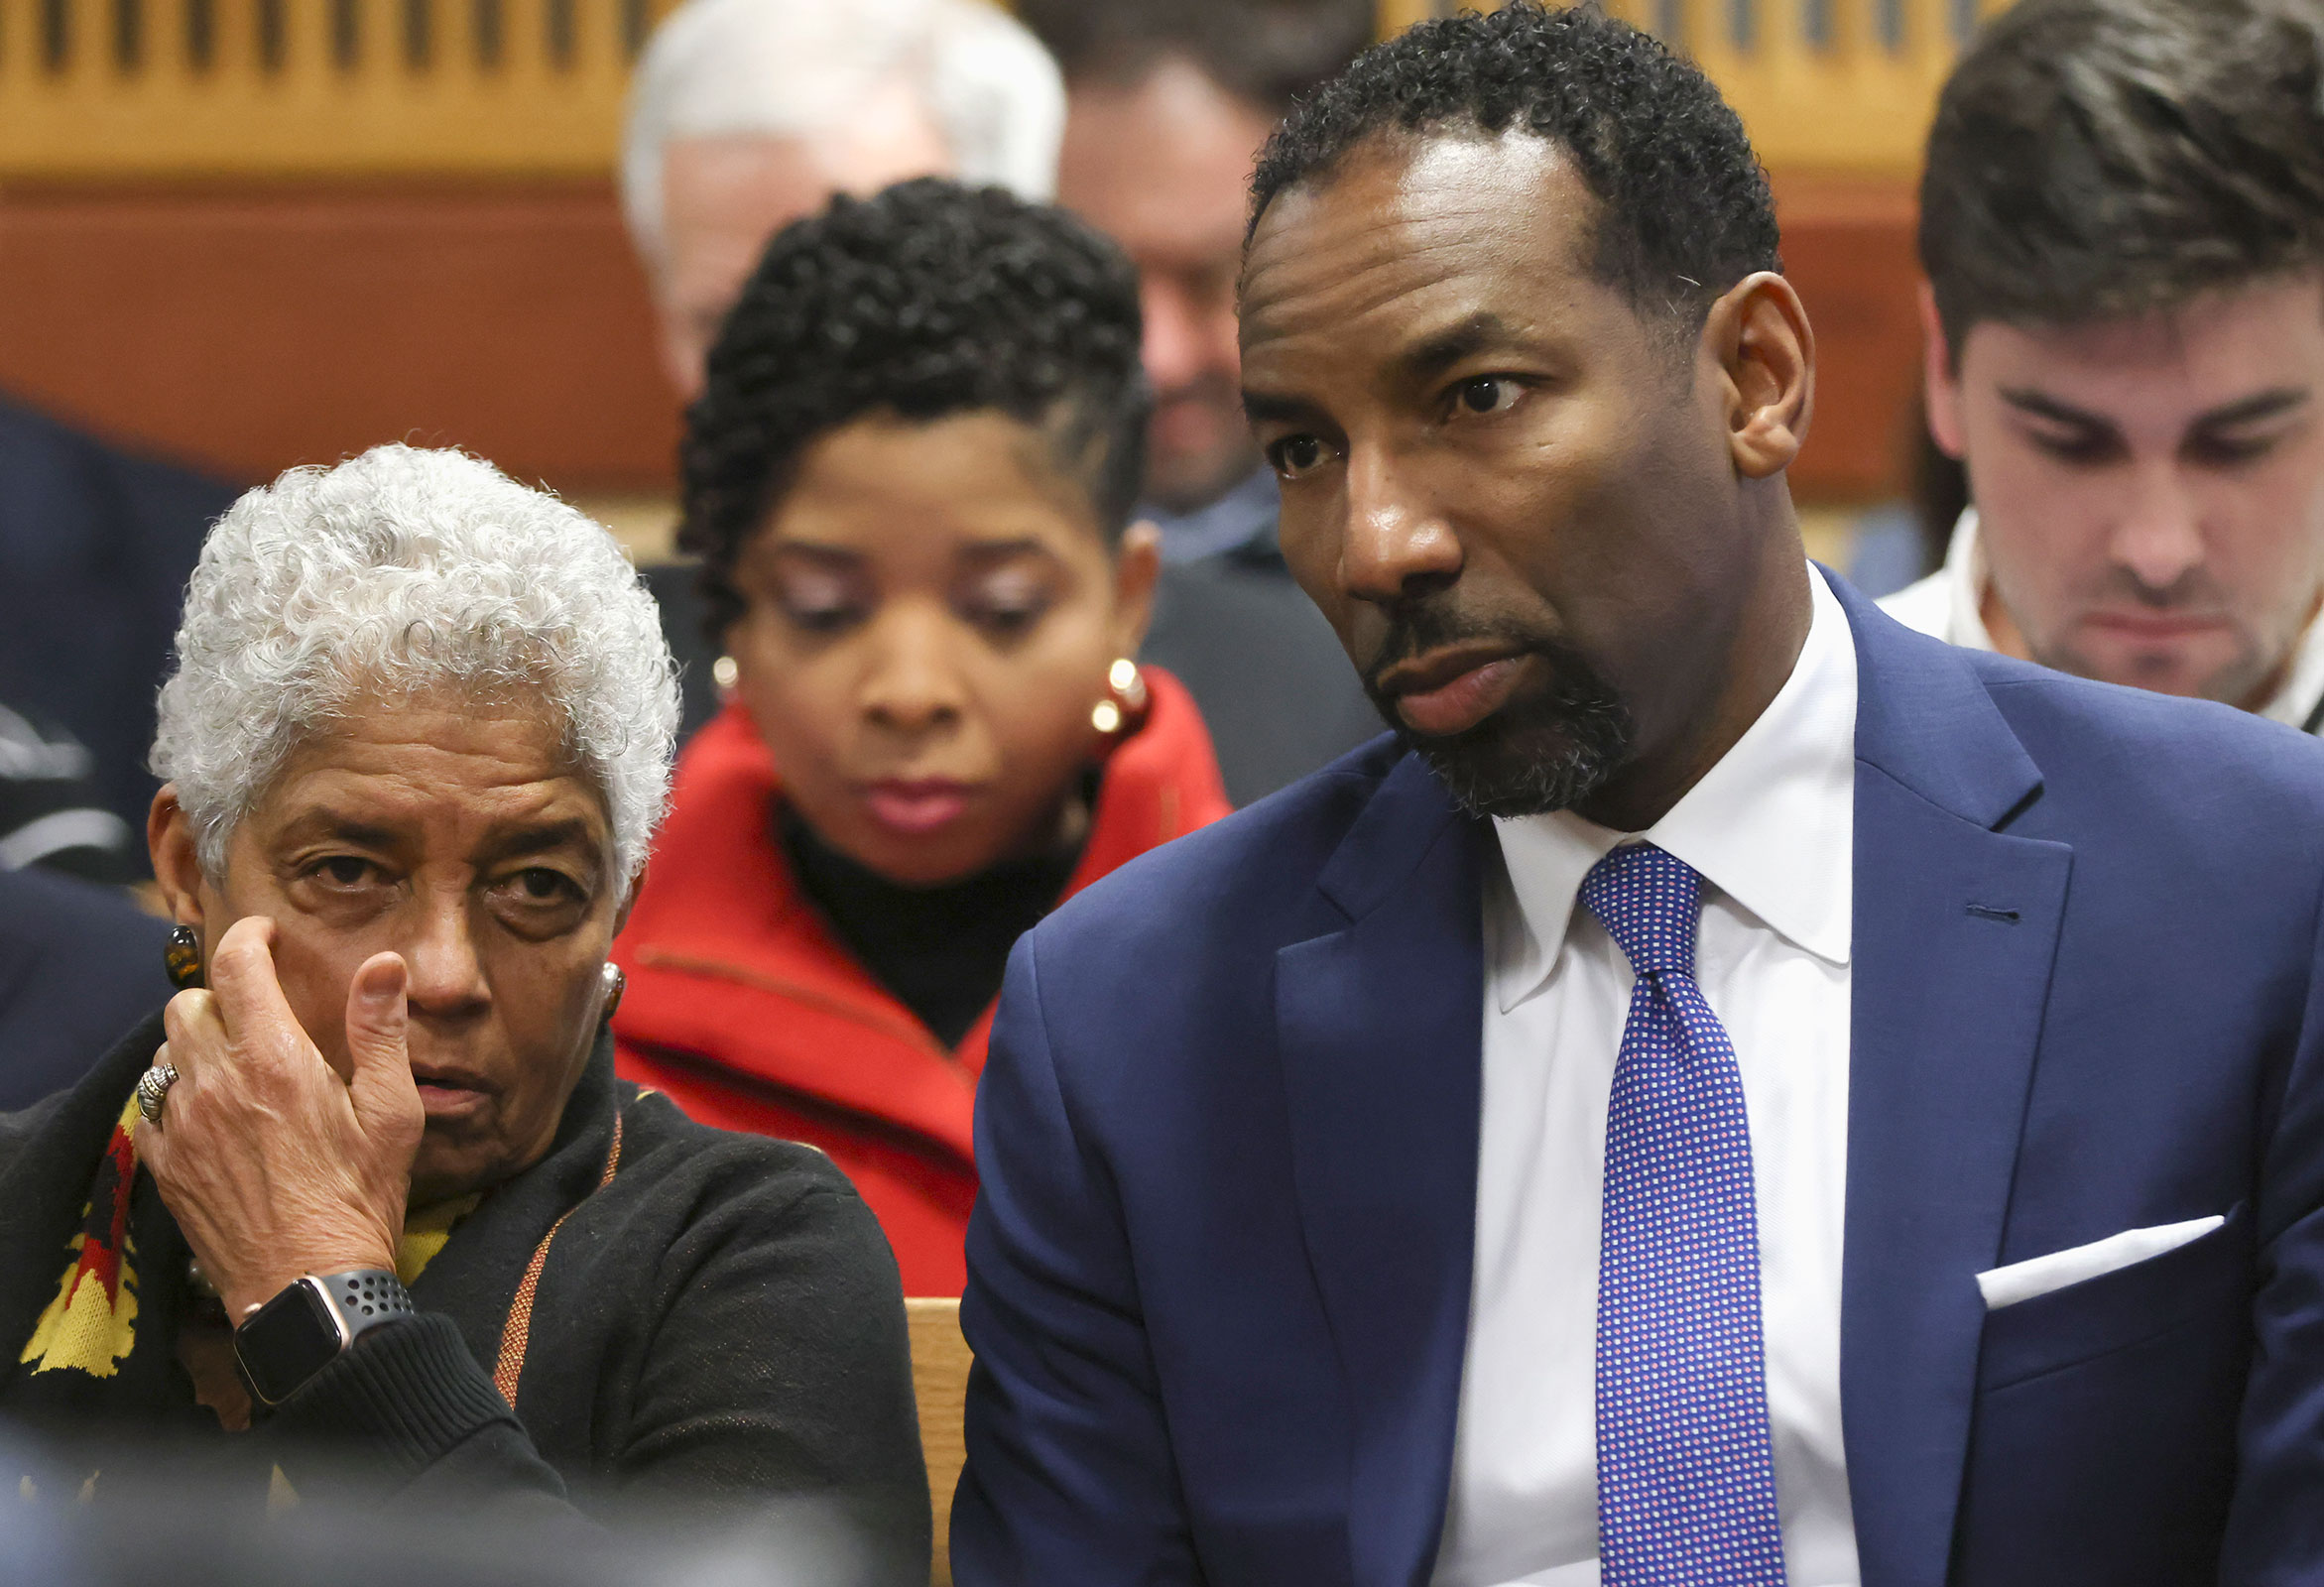 Former Atlanta Mayor Shirley Franklin and current Atlanta Mayor Andre Dickens talk amongst themselves as they sit in the gallery during a hearing in the case of the State of Georgia v. Donald John Trump at the Fulton County Courthouse on February 16, in Atlanta.